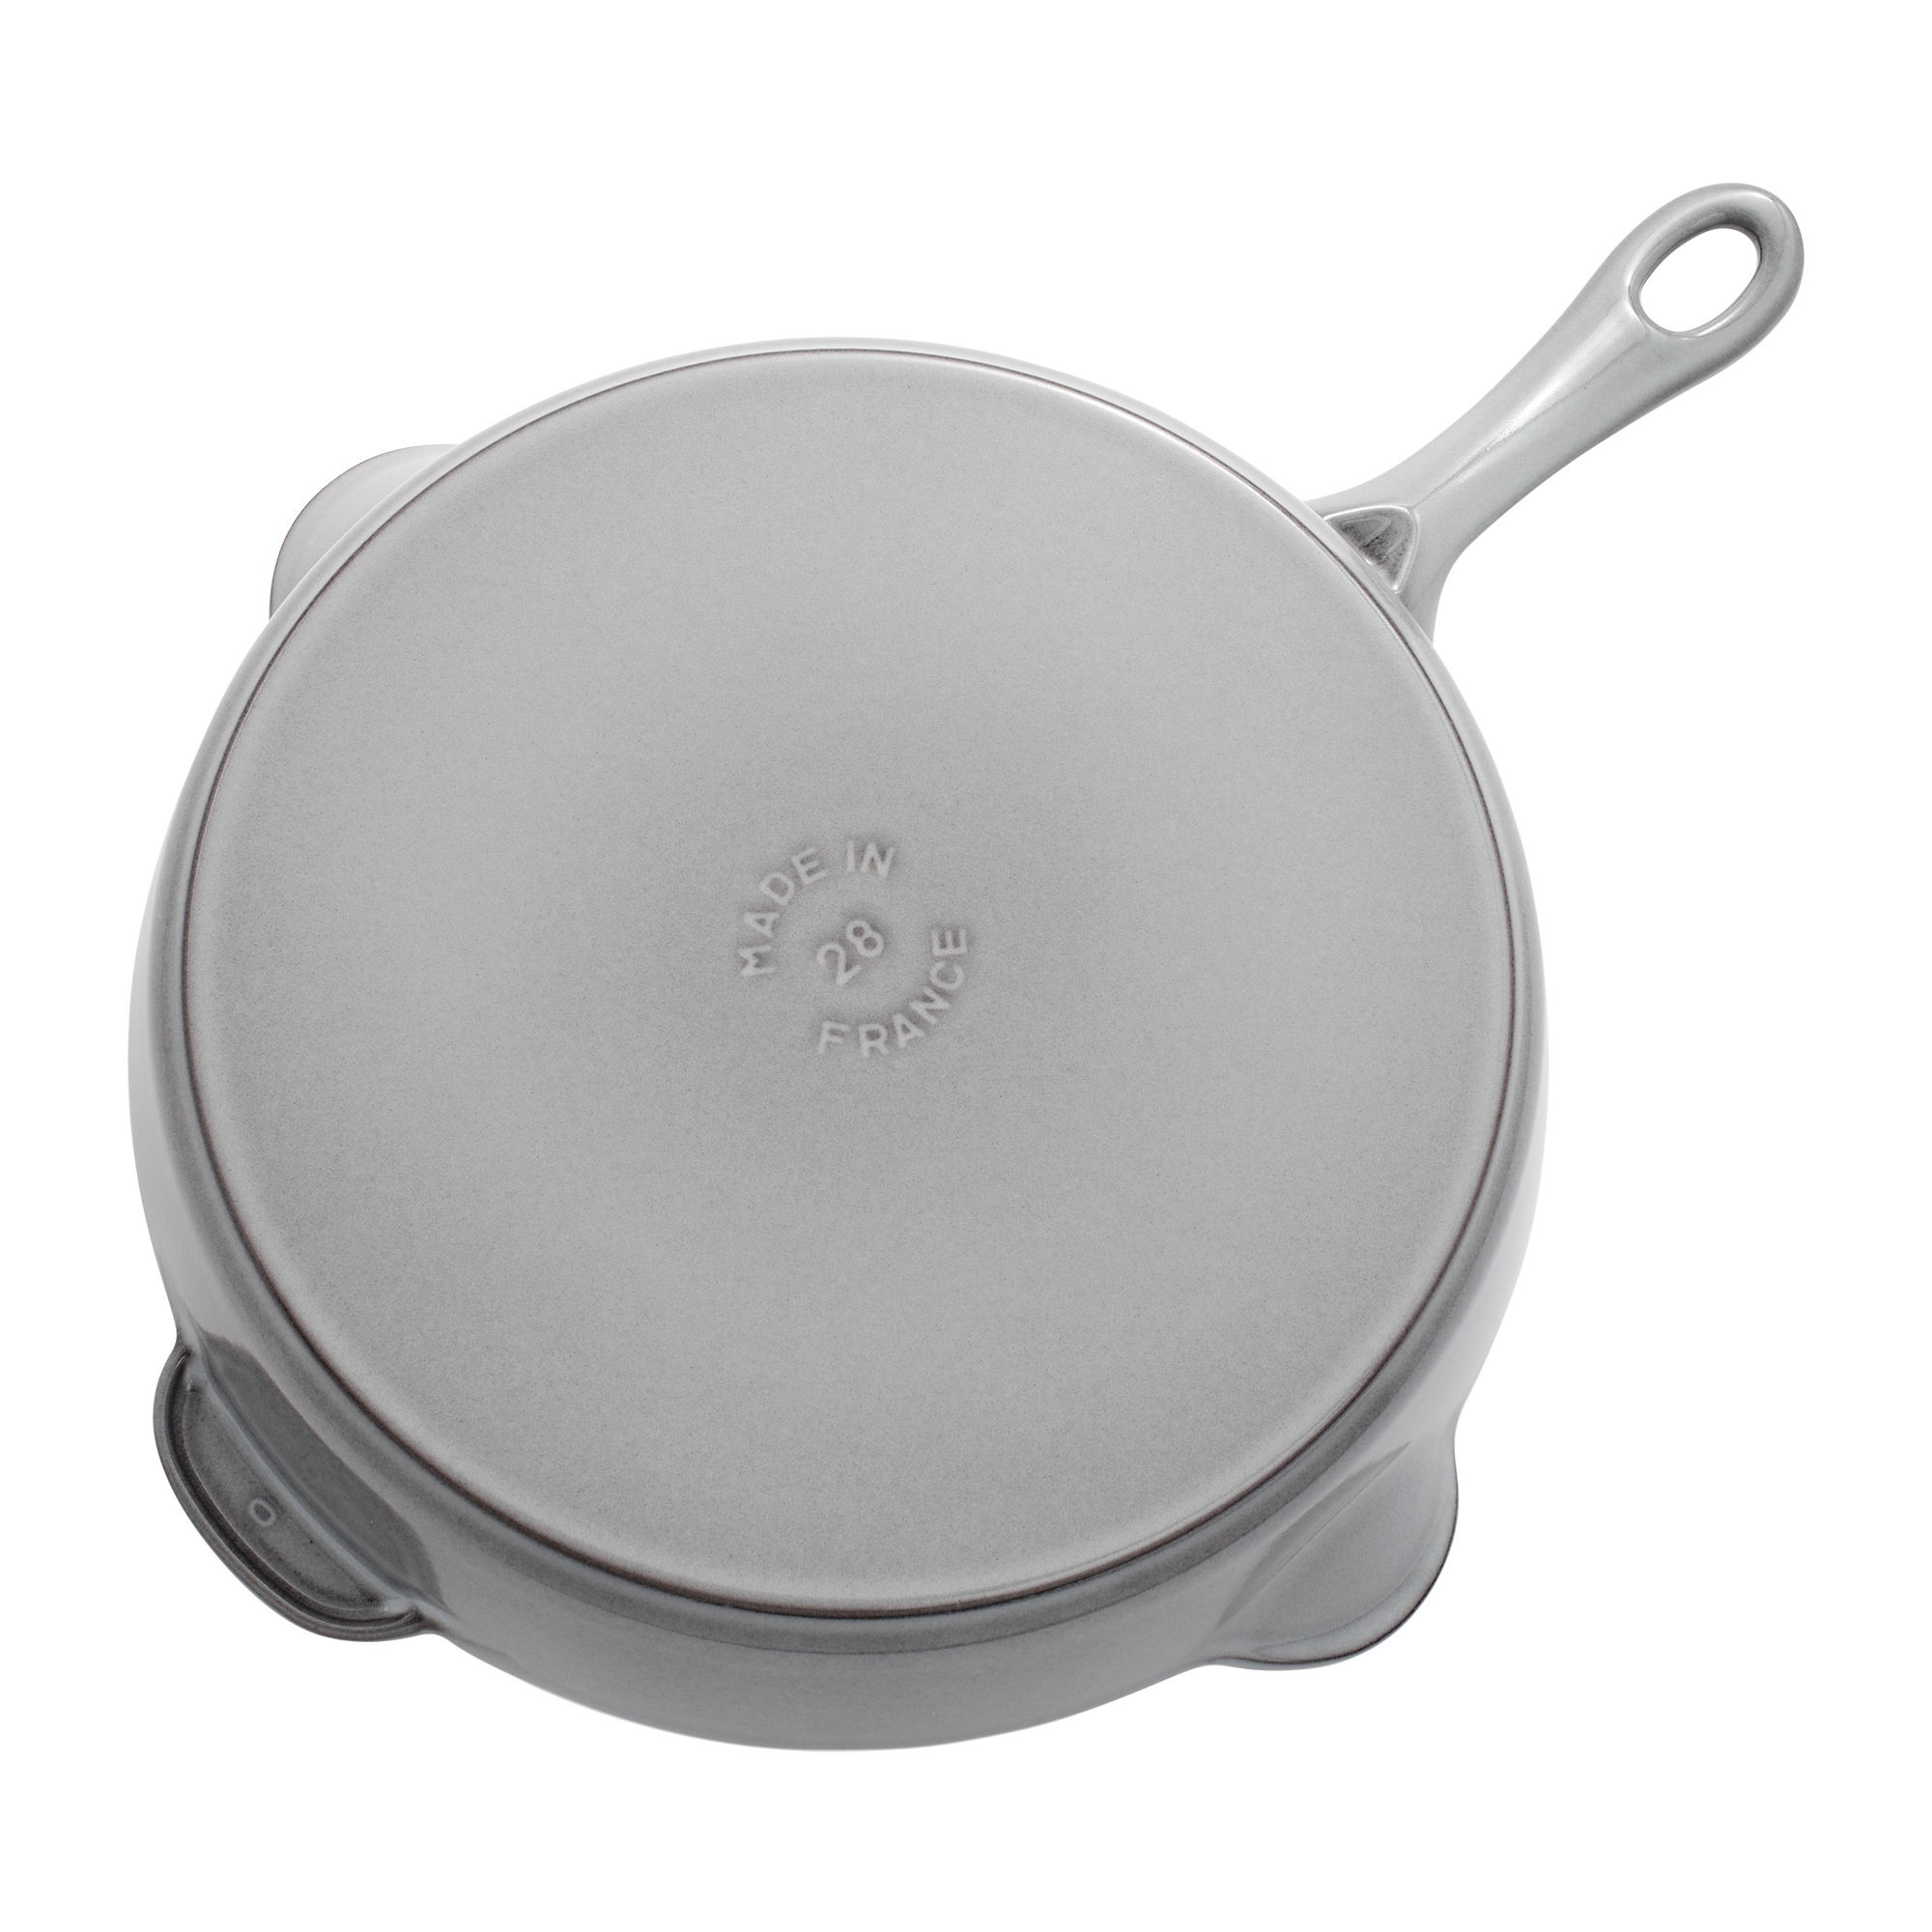 https://ak1.ostkcdn.com/images/products/is/images/direct/361ac901539551ac8f0369c9255fc37a80362769/Staub-Cast-Iron-11-inch-Traditional-Skillet.jpg